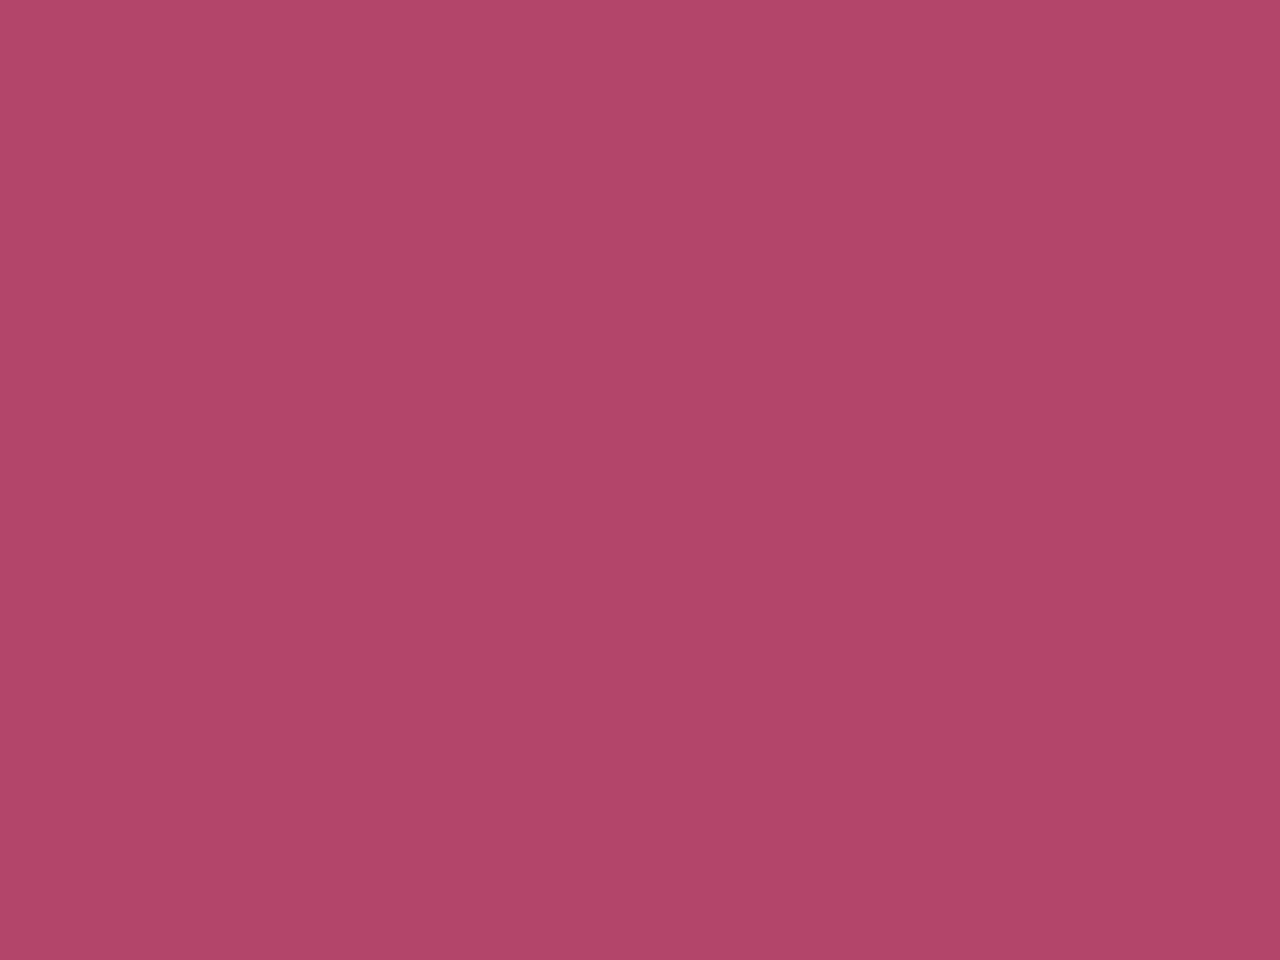 1280x960 Raspberry Rose Solid Color Background